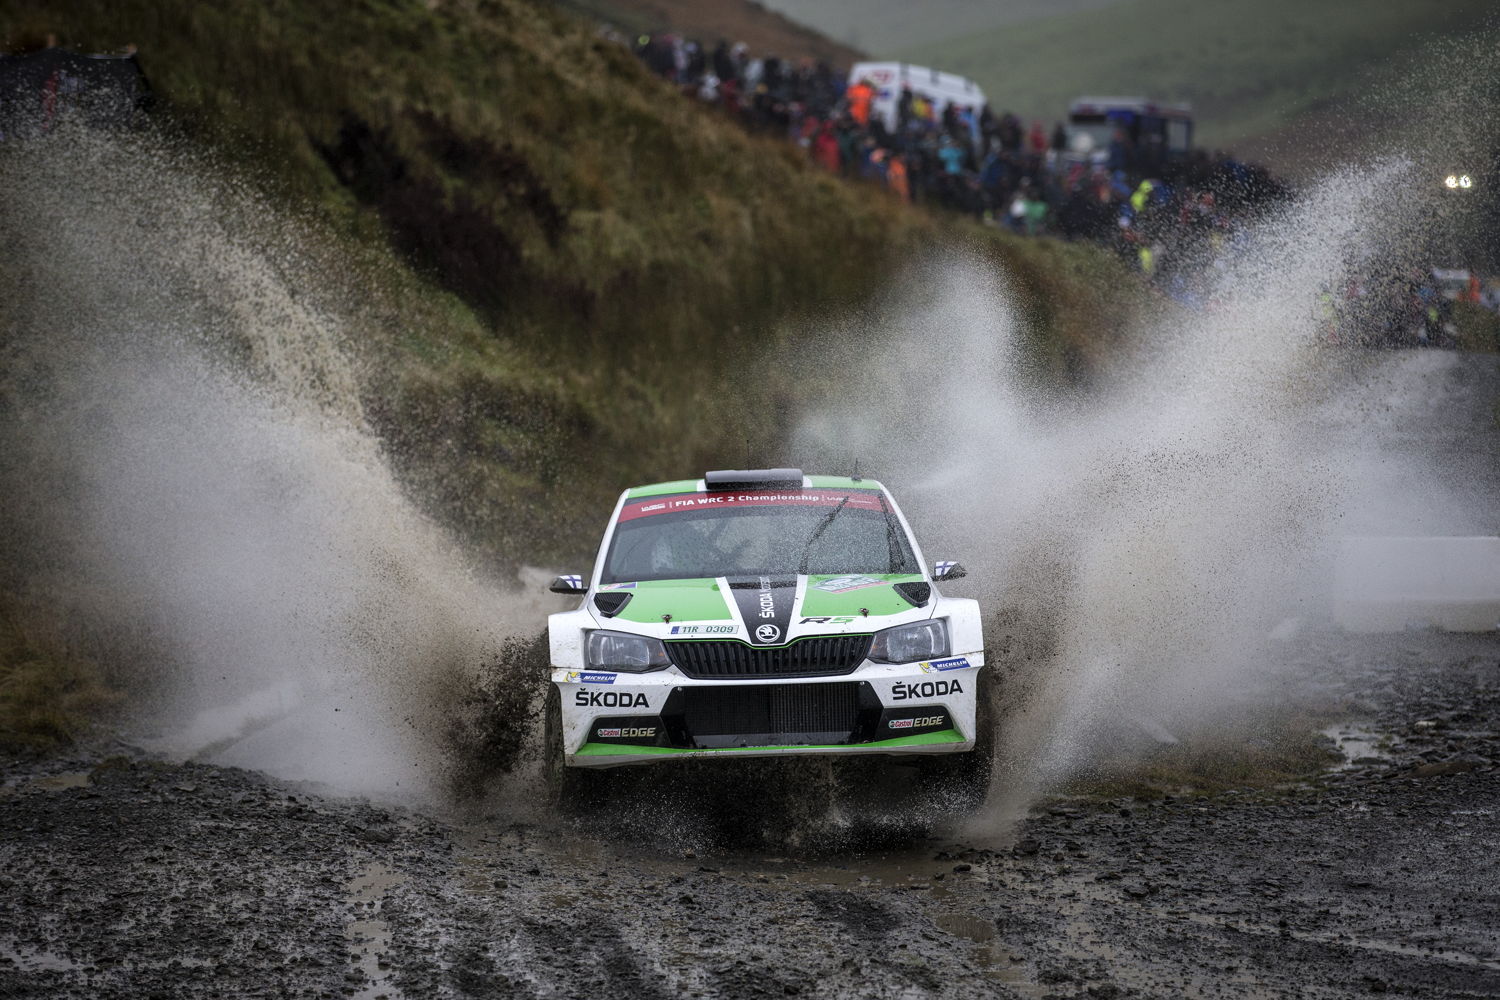 Esapekka Lappi / Janne Ferm won the WRC 2 class in Great Britain and, as the best-placed ŠKODA works duo, have the best chance of claiming the title in the Drivers’ and Co-Drivers’ Championship.